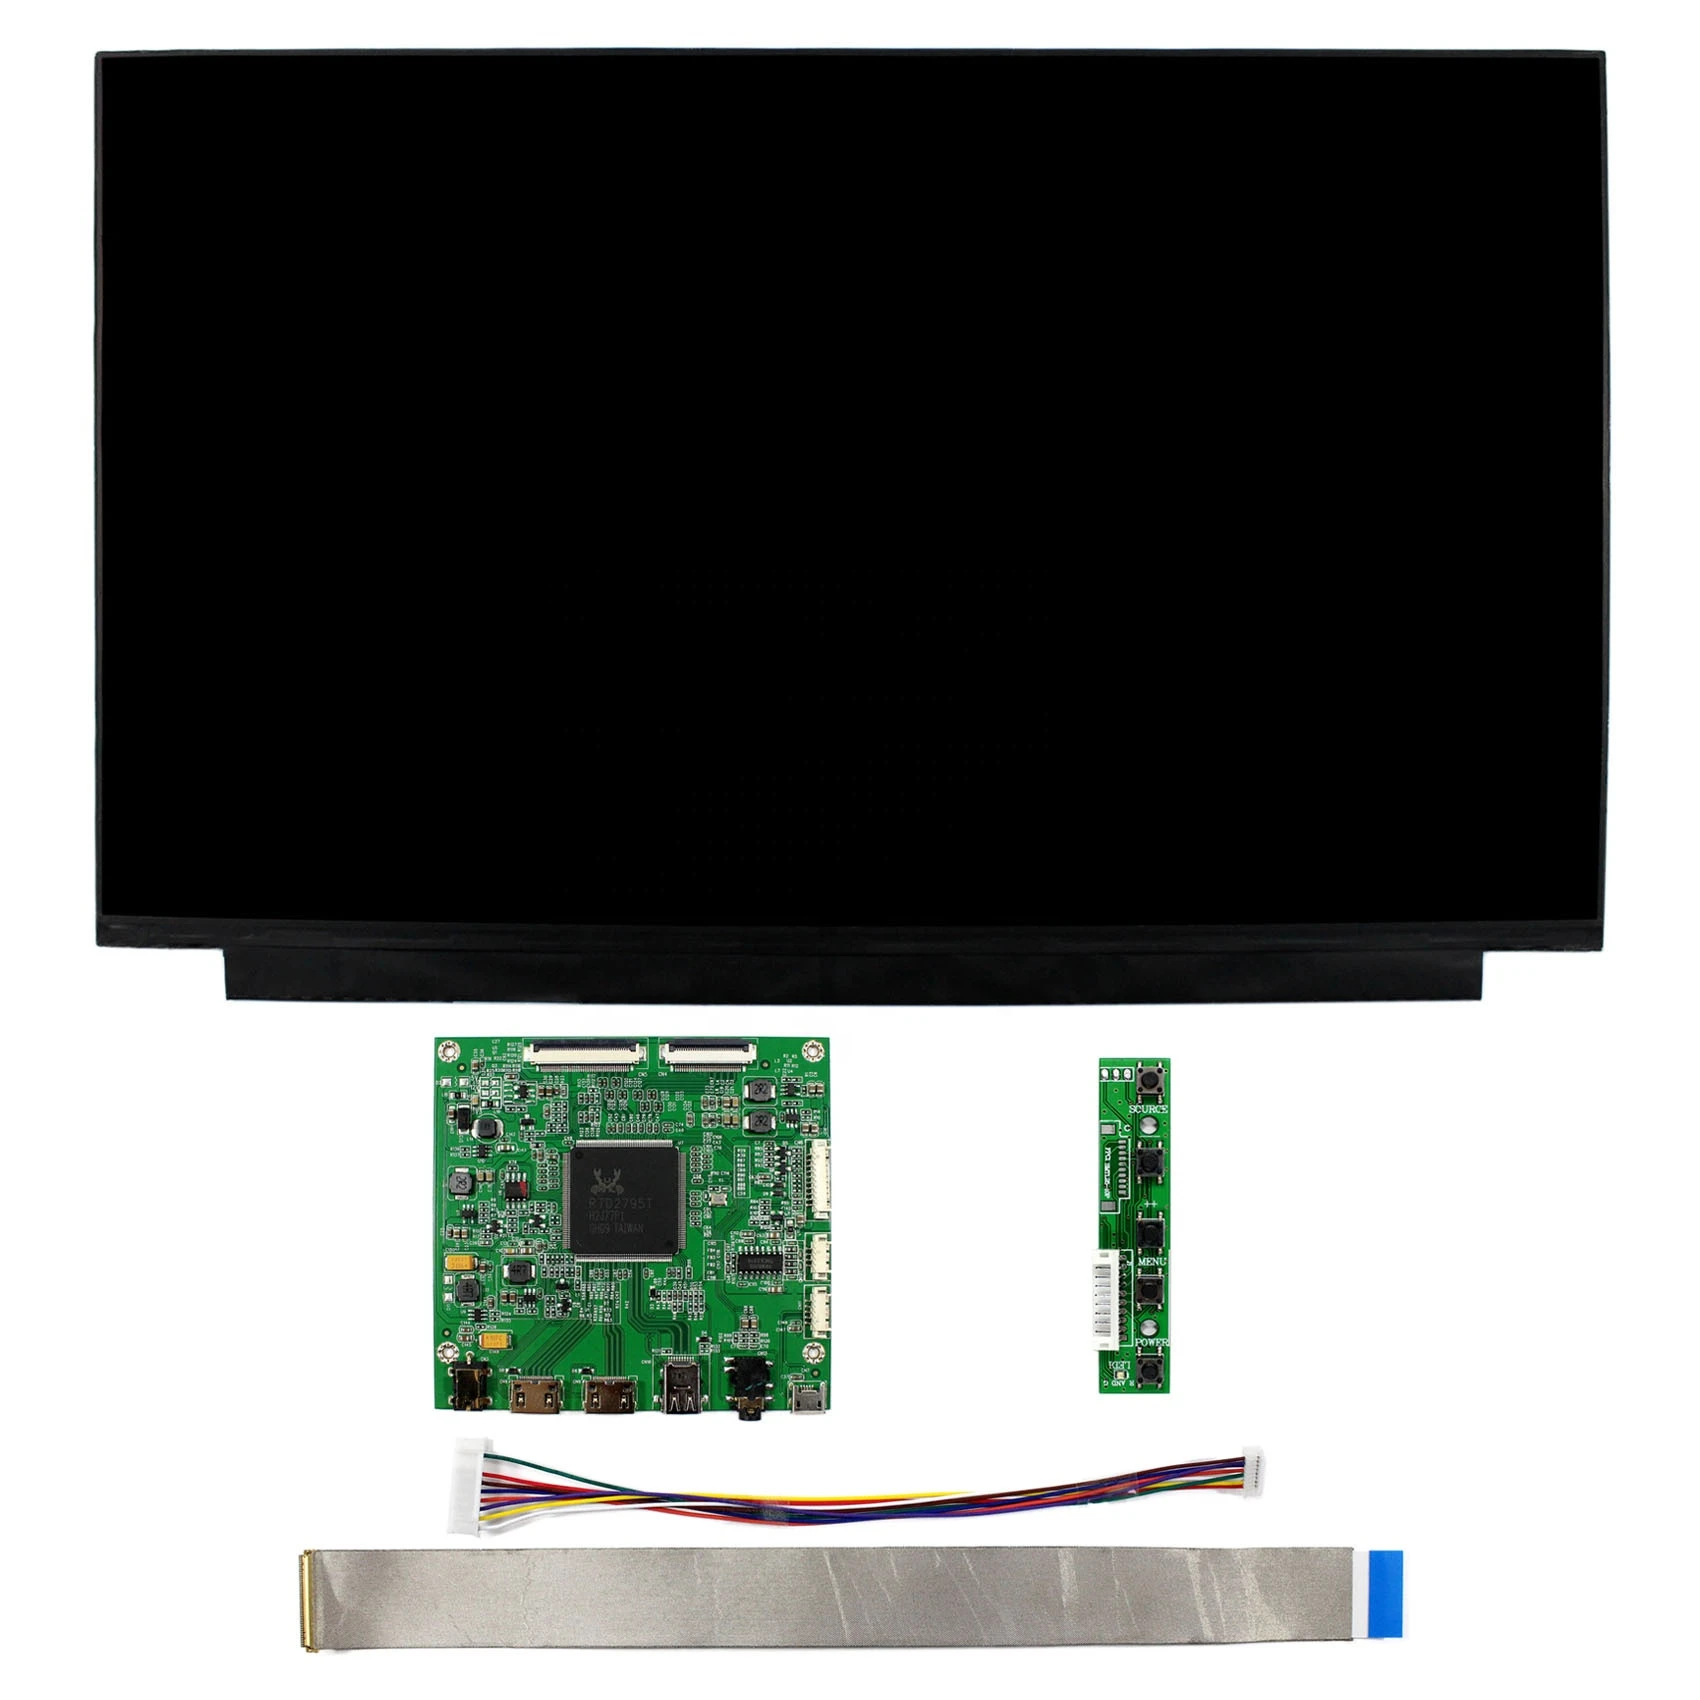 15.6inch tft lcd monitor NV156QUM-N32  with 3840x2160  resolution